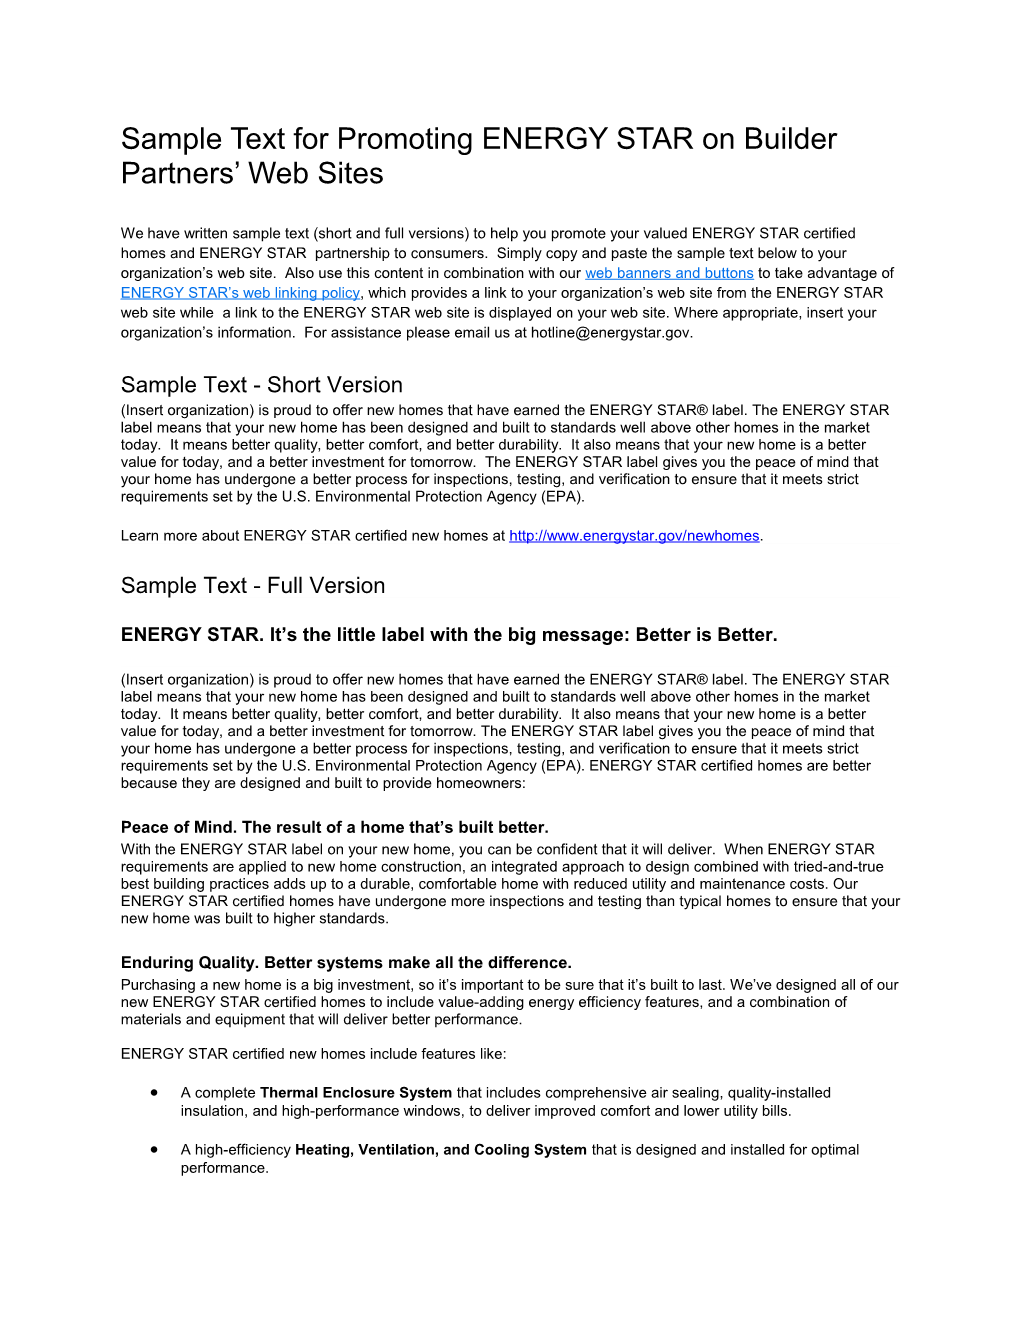 Sample Text for Promoting ENERGY STAR on Builder Partners Web Sites